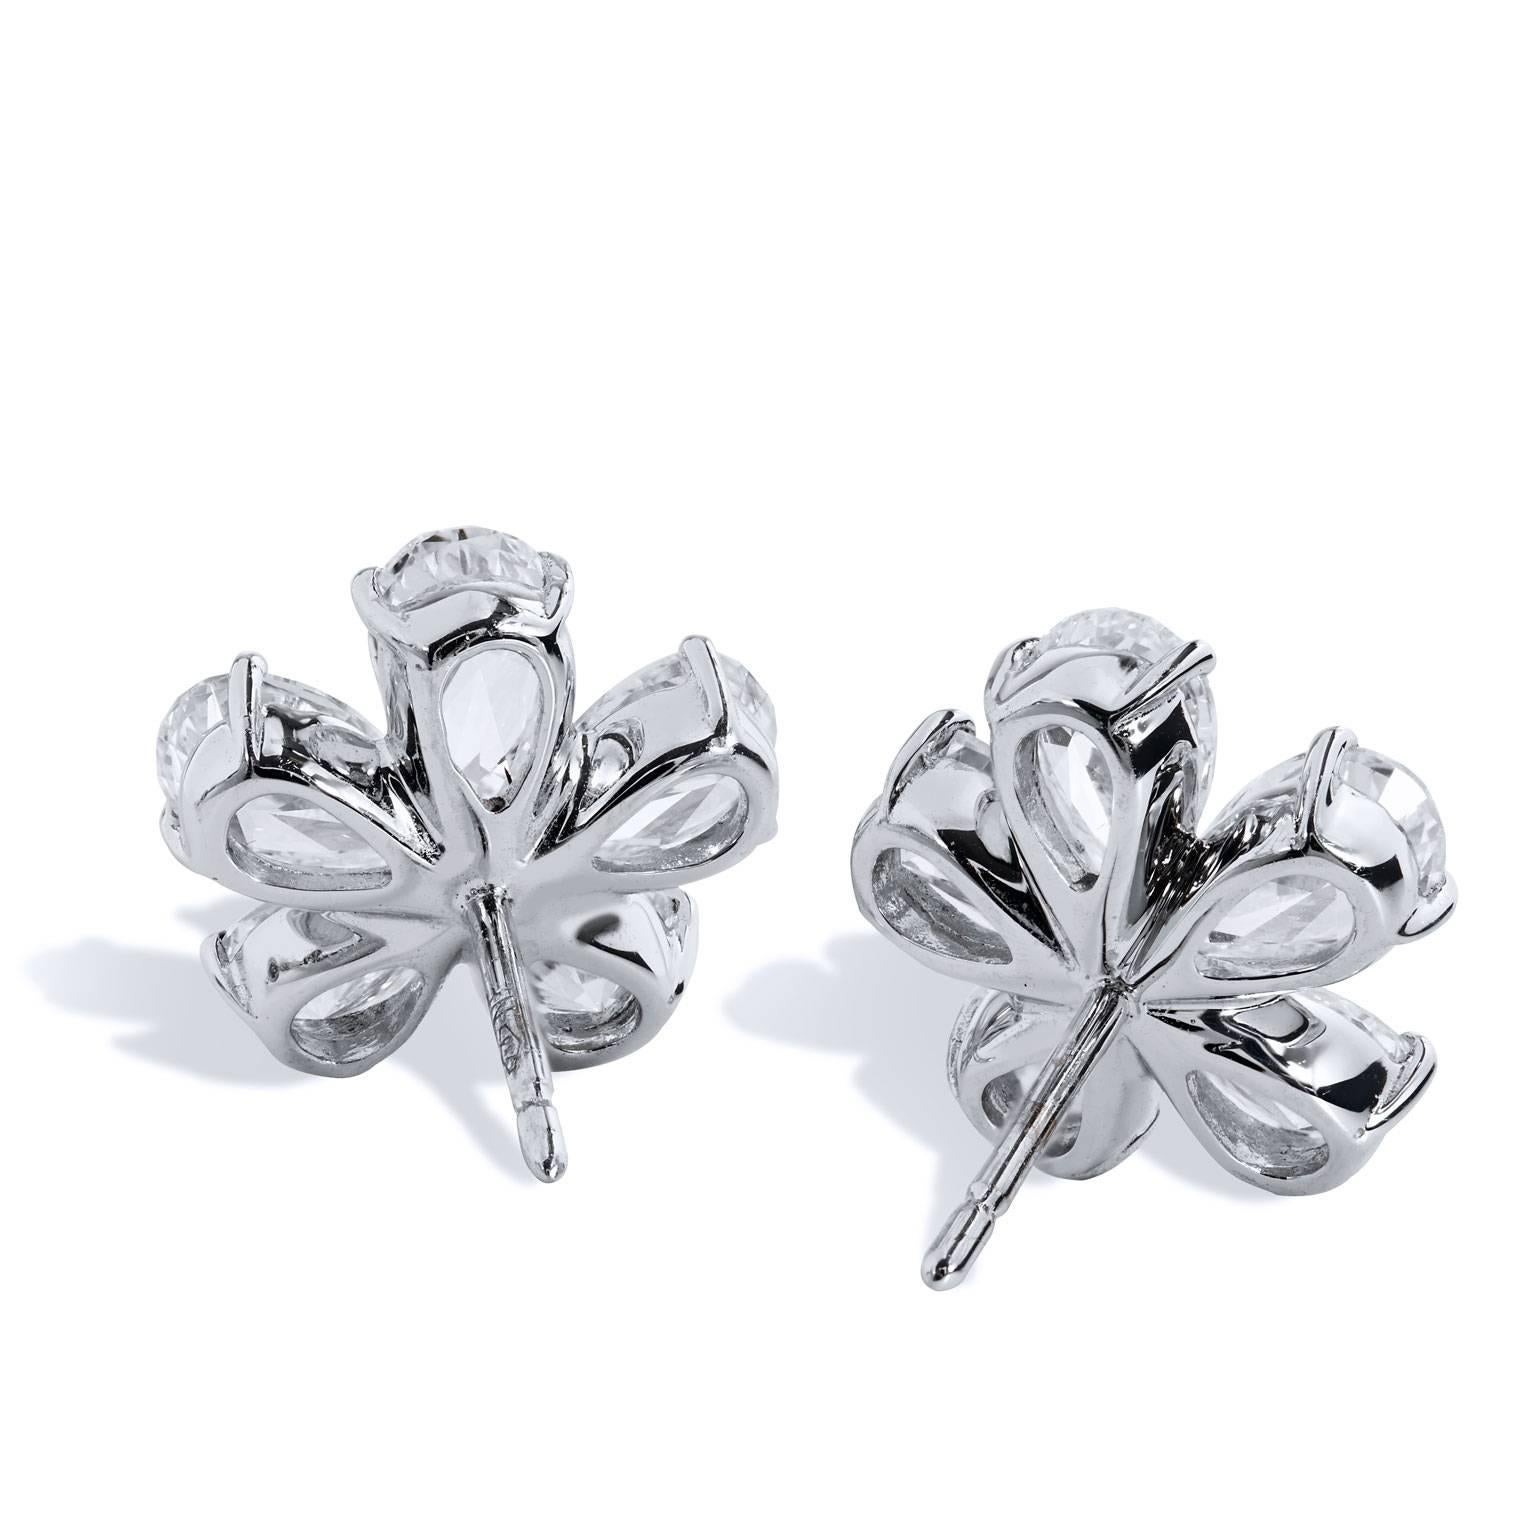 18 karat white gold flower stud earrings featuring a total weight of 4.41 carat of marquise and round diamonds in flower shape (F/SI1).